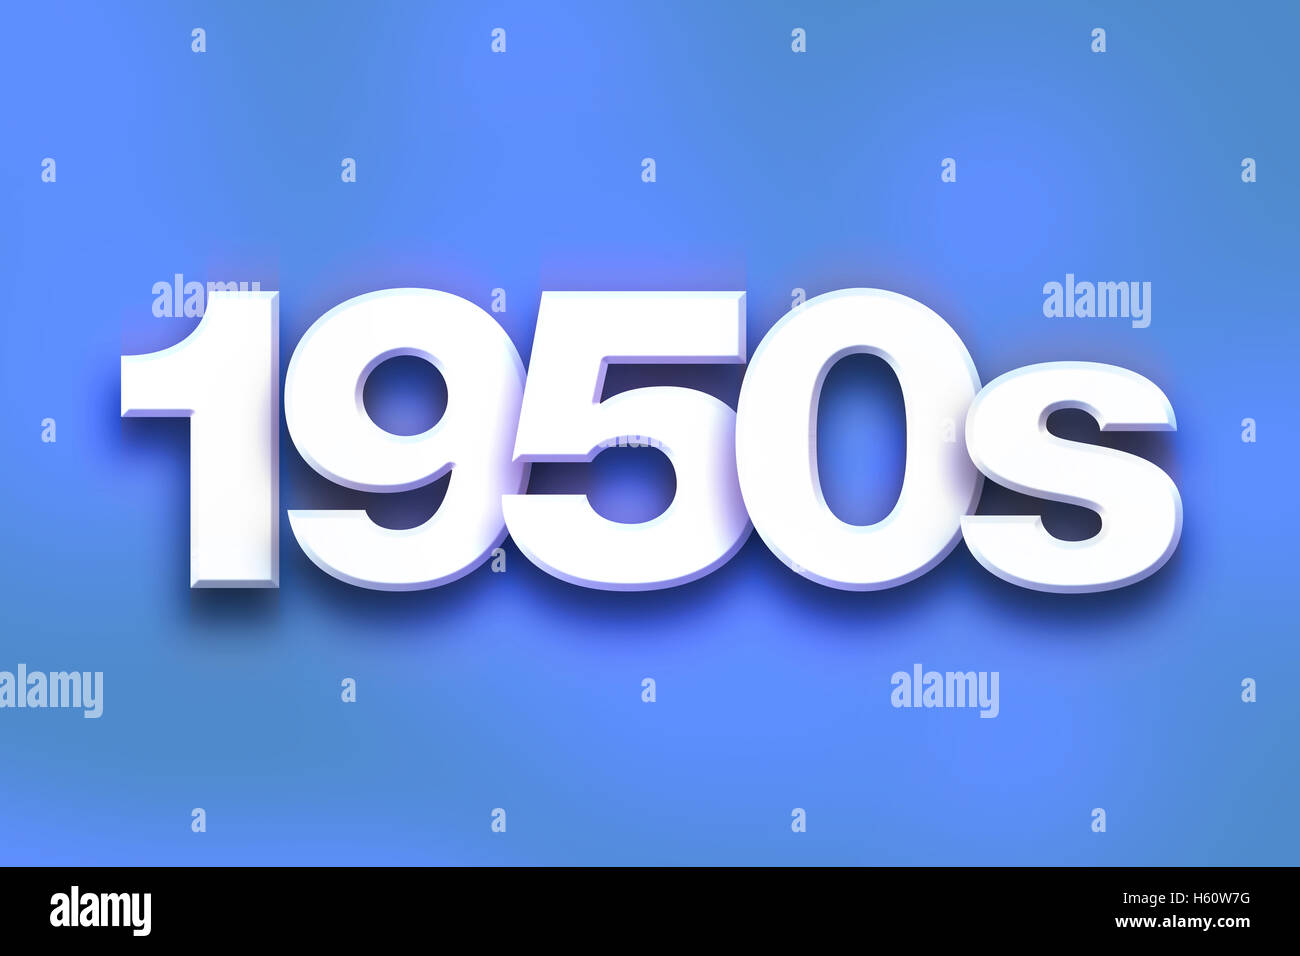 The word '1950s' written in white 3D letters on a colorful background concept and theme. Stock Photo